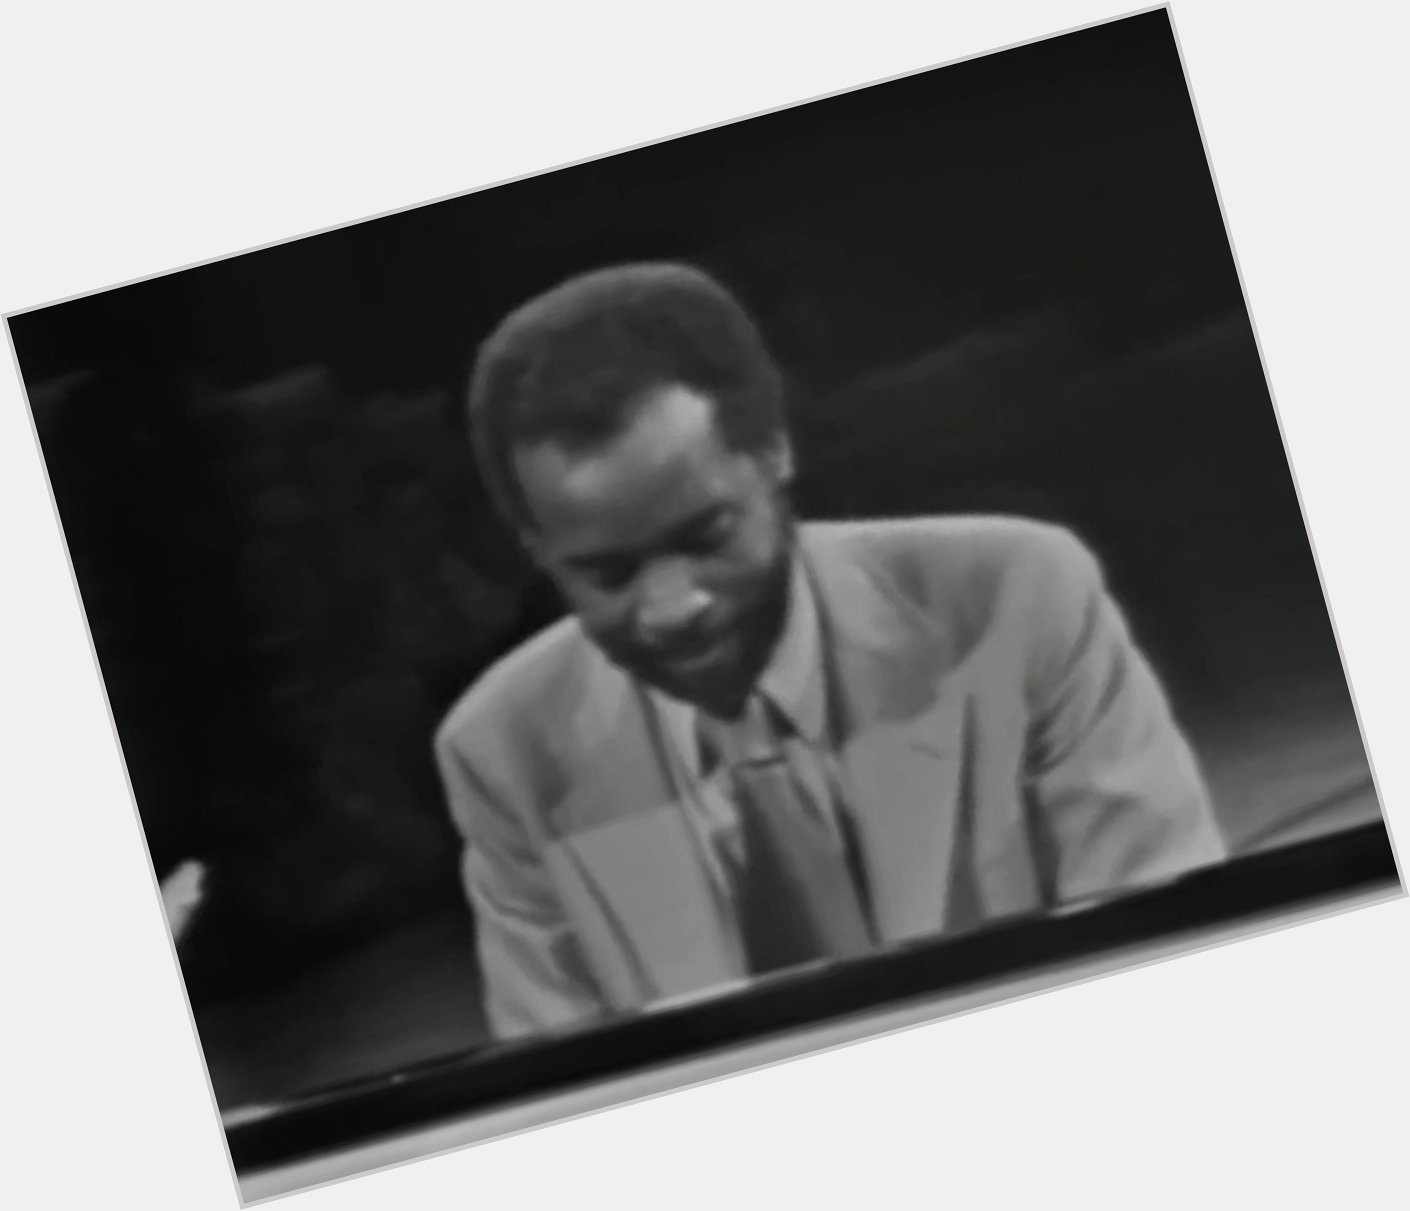 Happy birthday to the great Ahmad Jamal who was born on this day in 1930. Here he is performing live in Paris, 1971. 